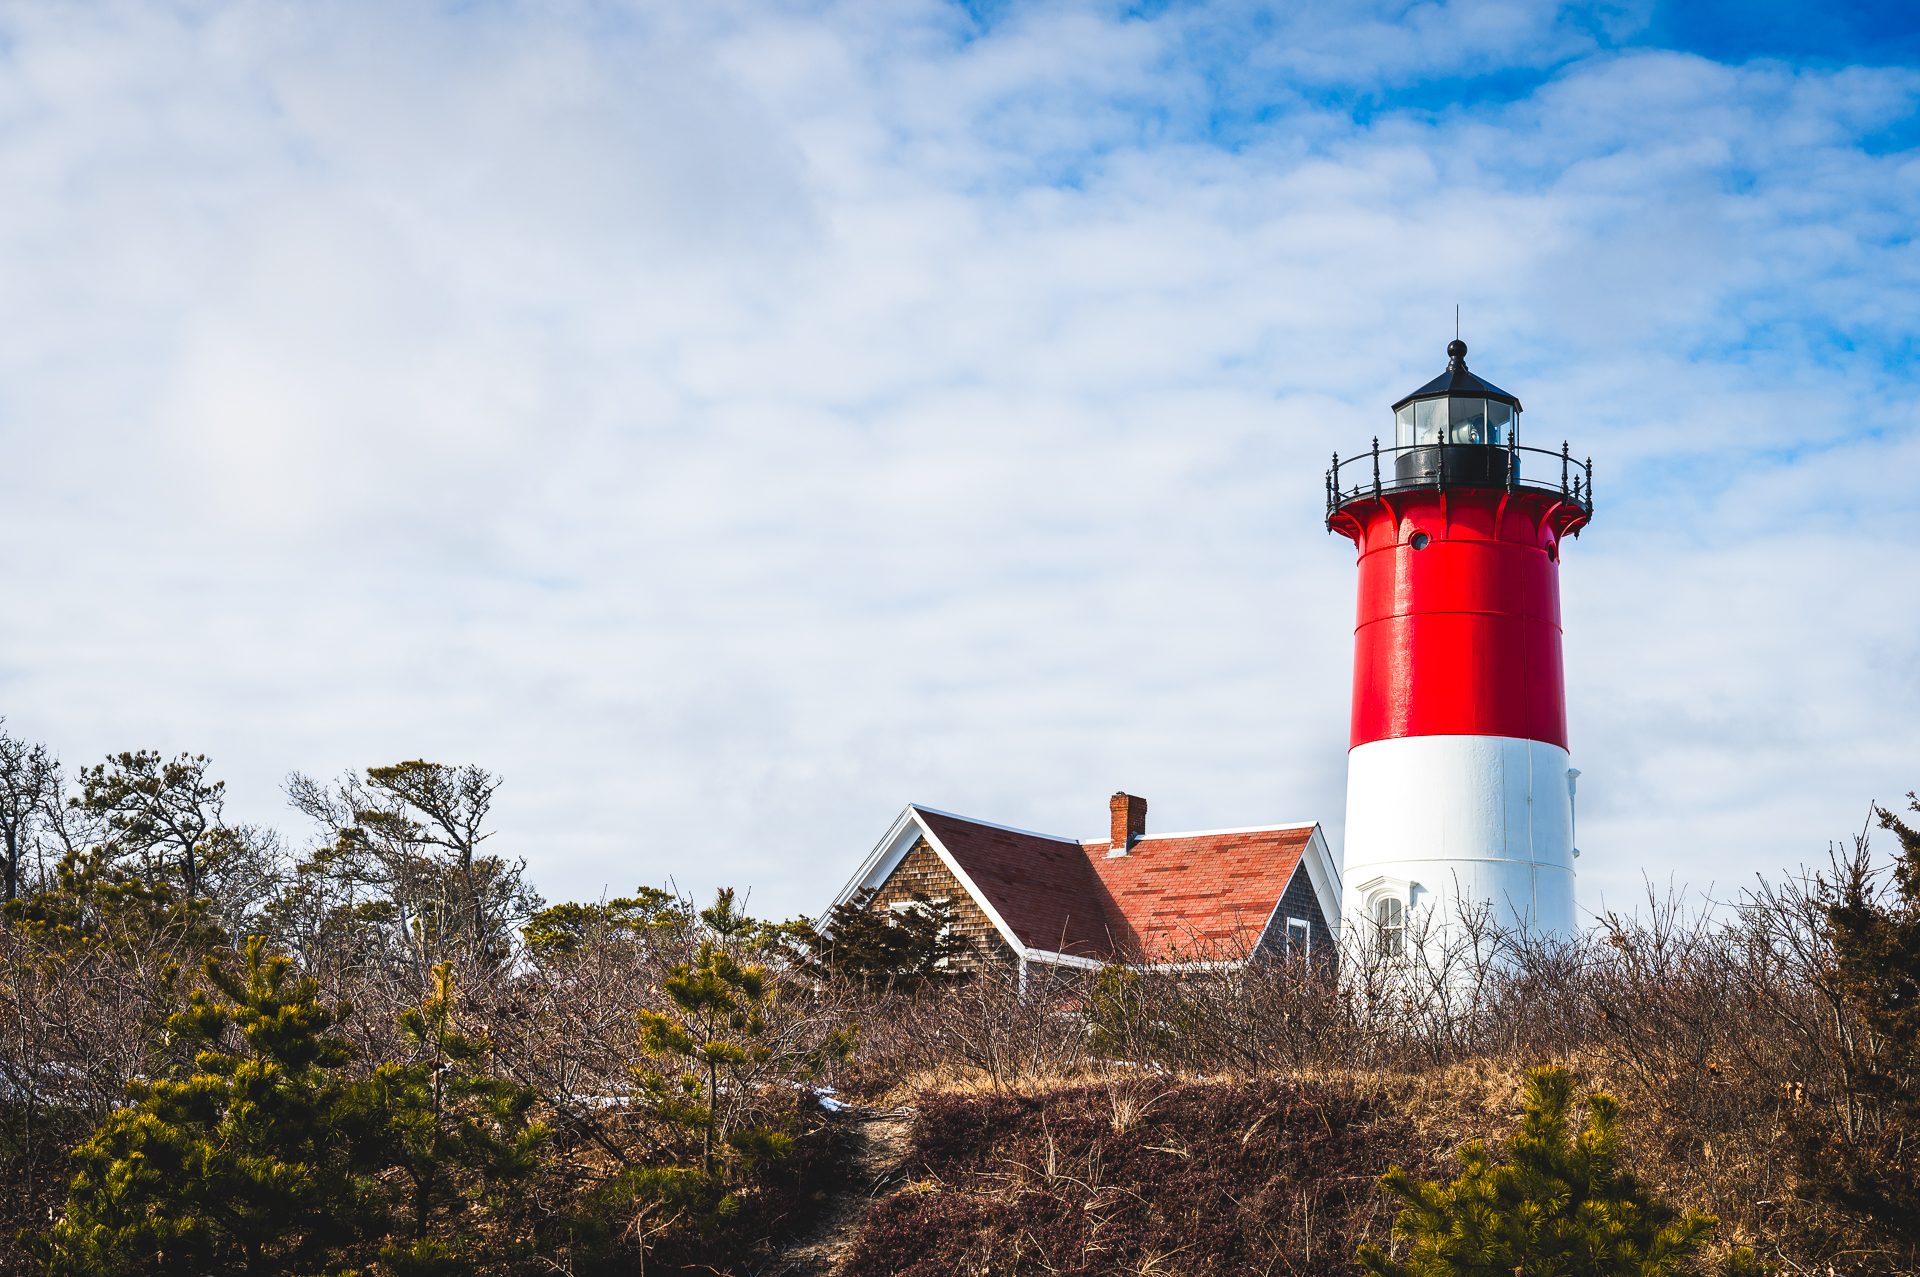 Nauset Light standing tall against clear blue skies.